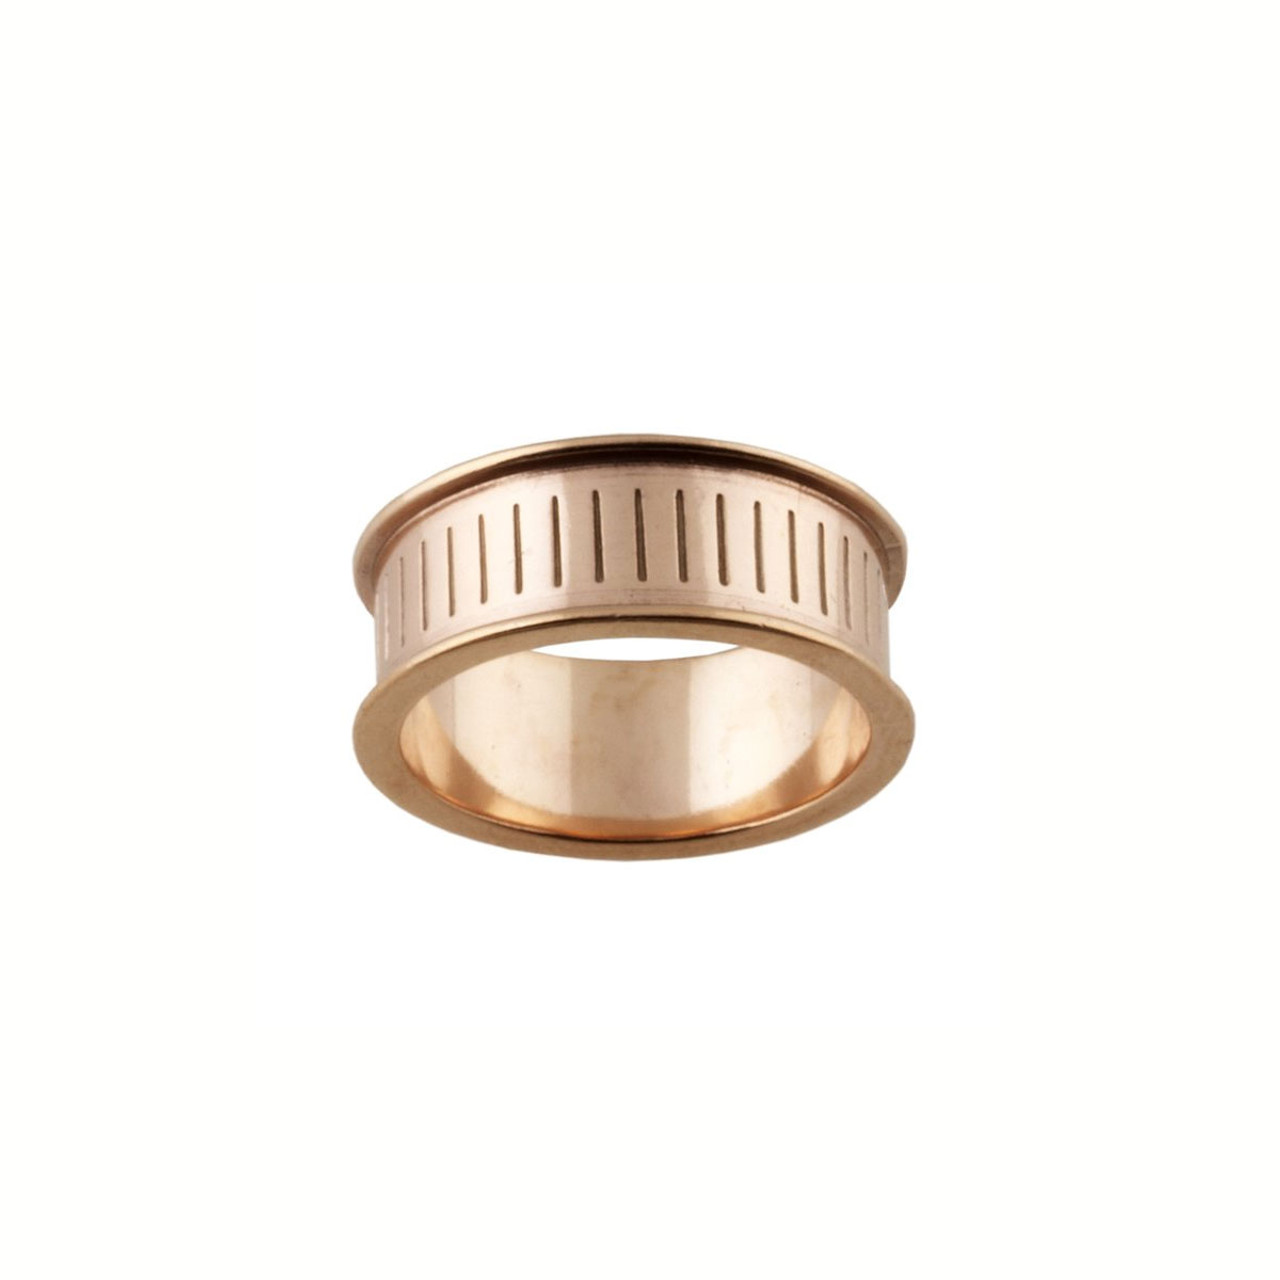 Ring Core 8mm wide - Channel - Copper - UK Size P 1/2 